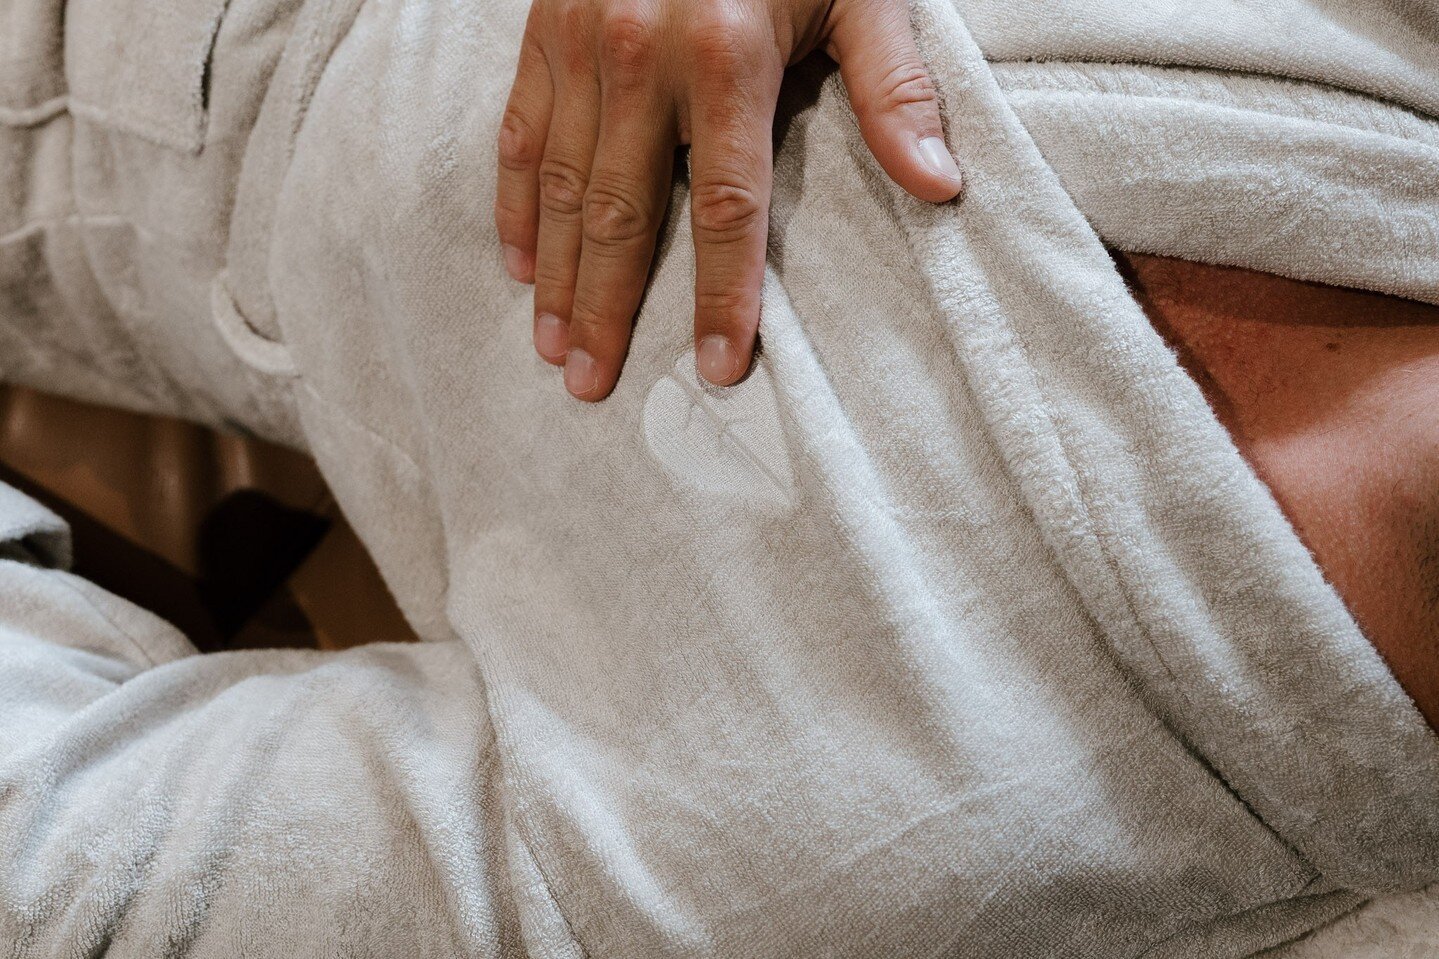 The Indah Robe Experience ~ Arrive 10 minutes prior to your treatment to allow your time to unwind and change into the robe experience. Enjoy your moment to yourself #indahdayspa